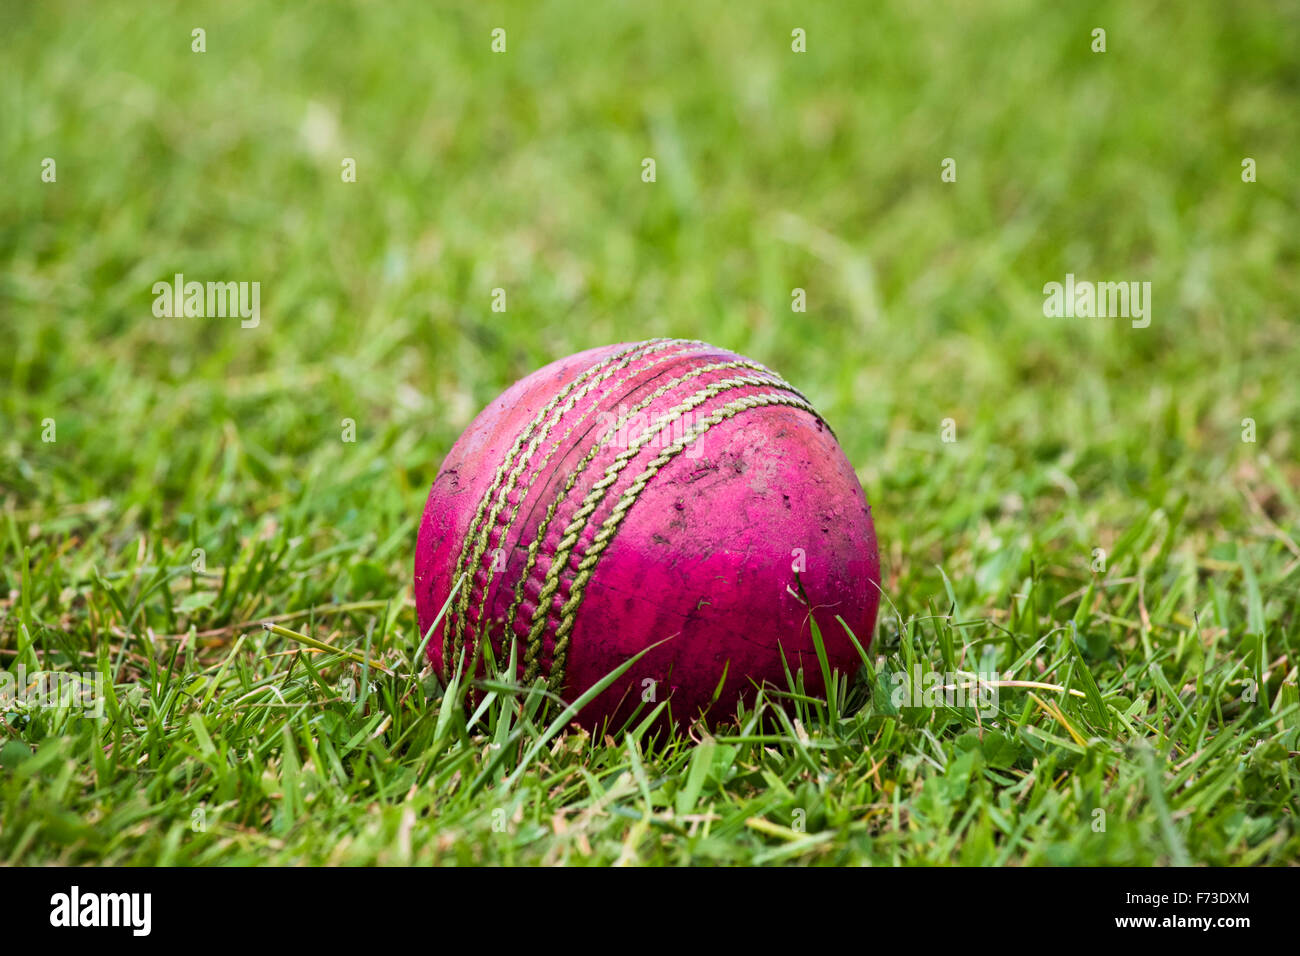 Close up of  red cricket ball on the outfield digitally altered to the colour pink Stock Photo